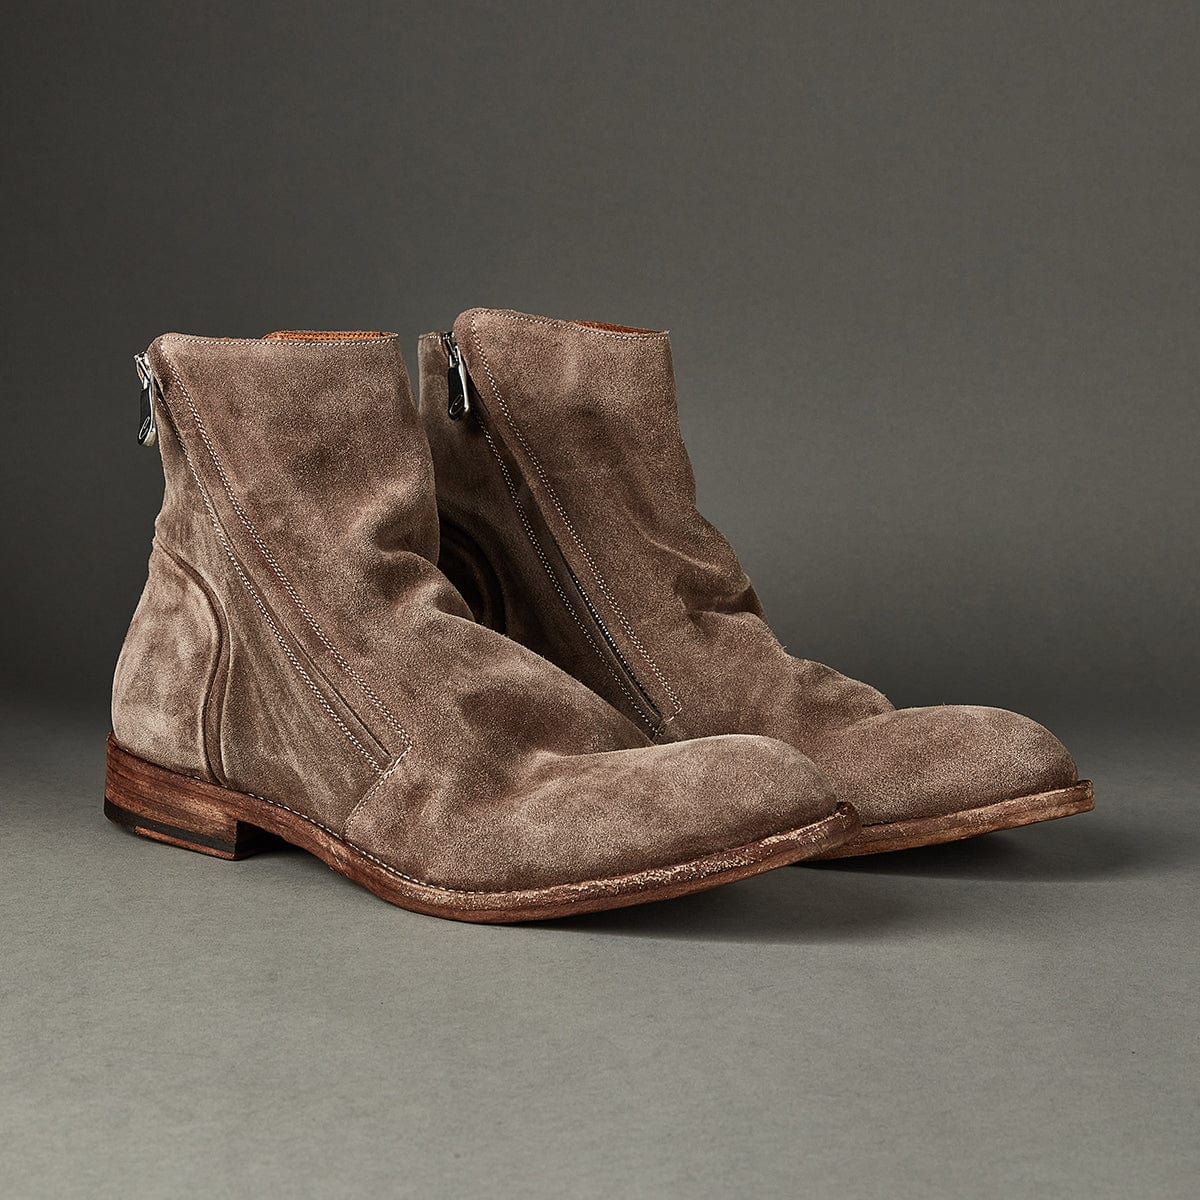 Chiesa Taupe - 124 Shoes